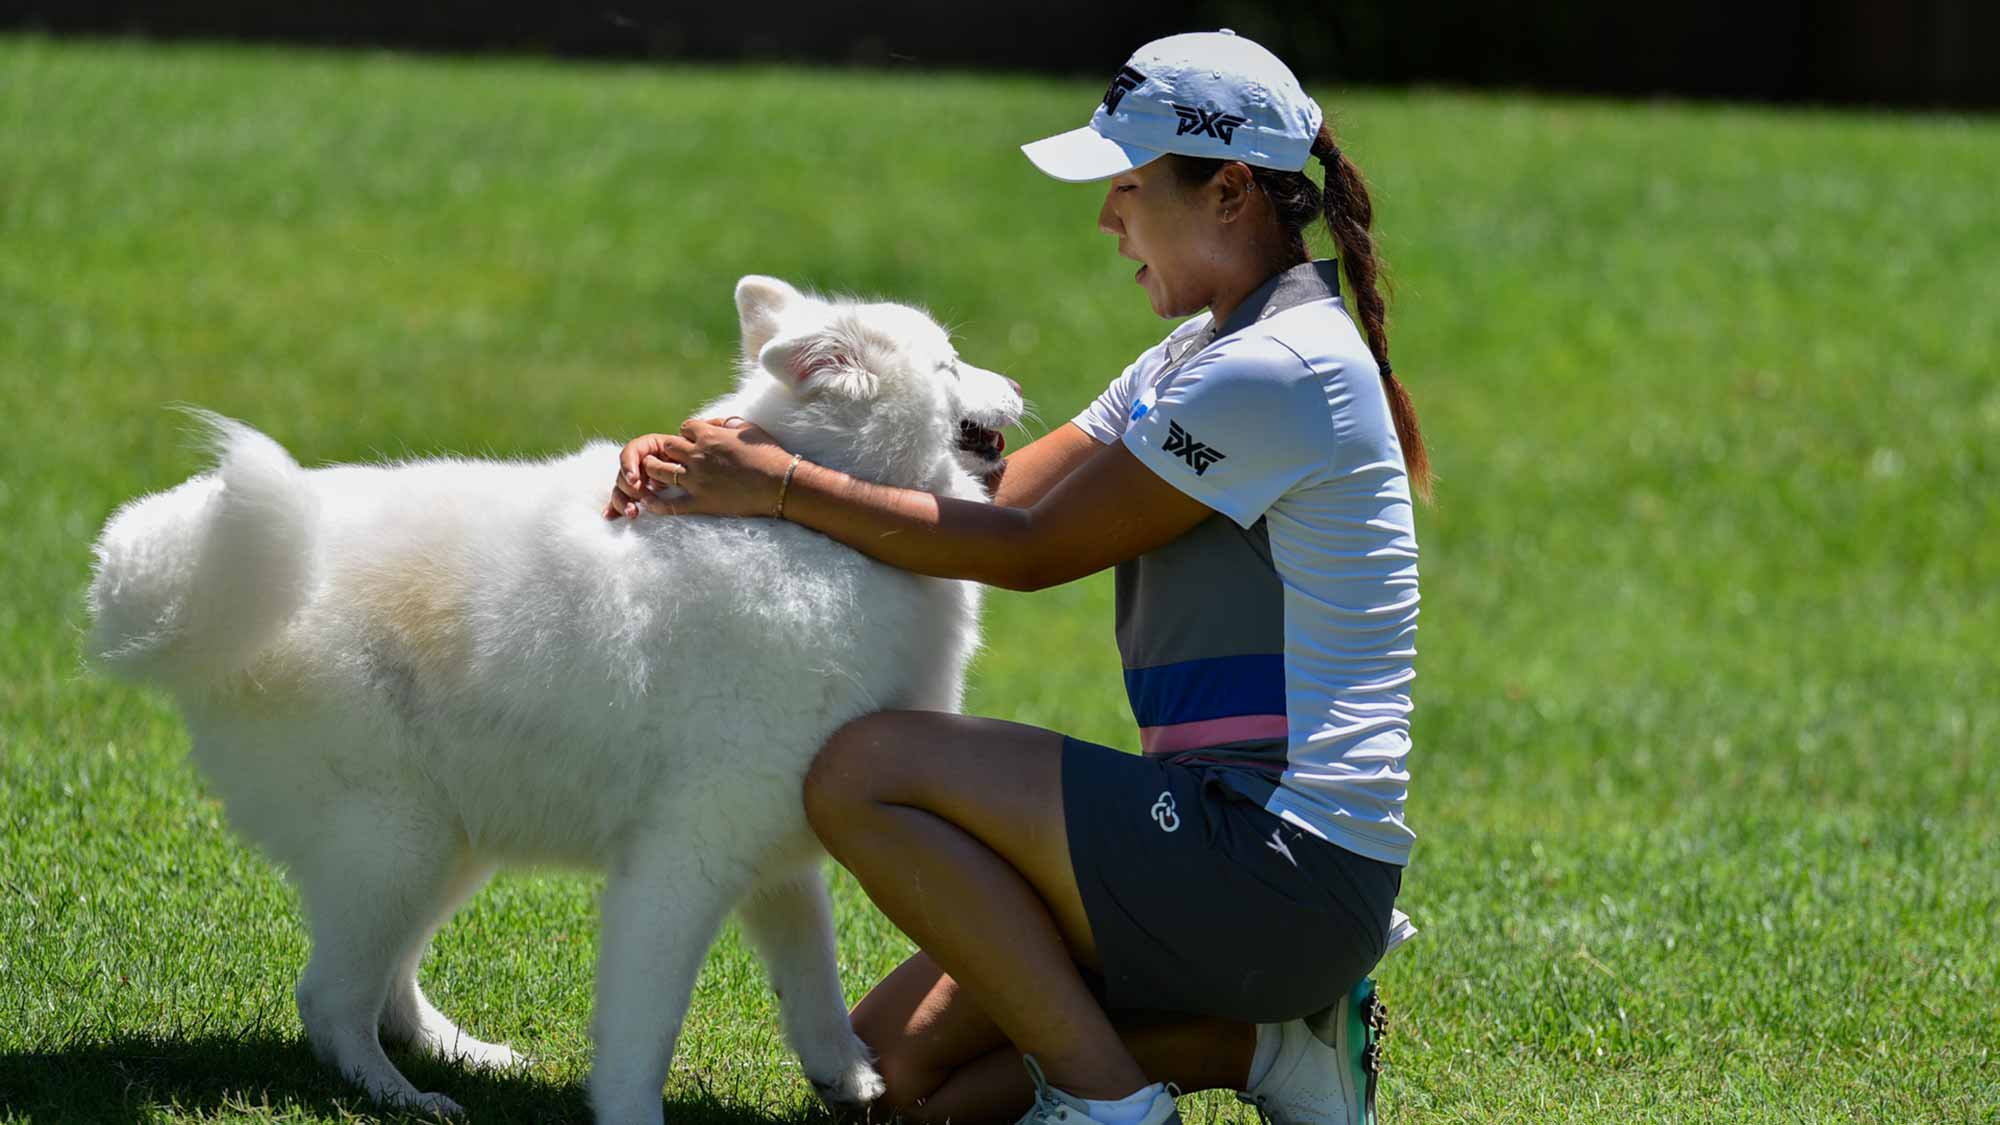 Defending champion Lydia Ko makes friends with a dog on-site at the 2017 Walmart NW Arkansas Championship Presented by P&G